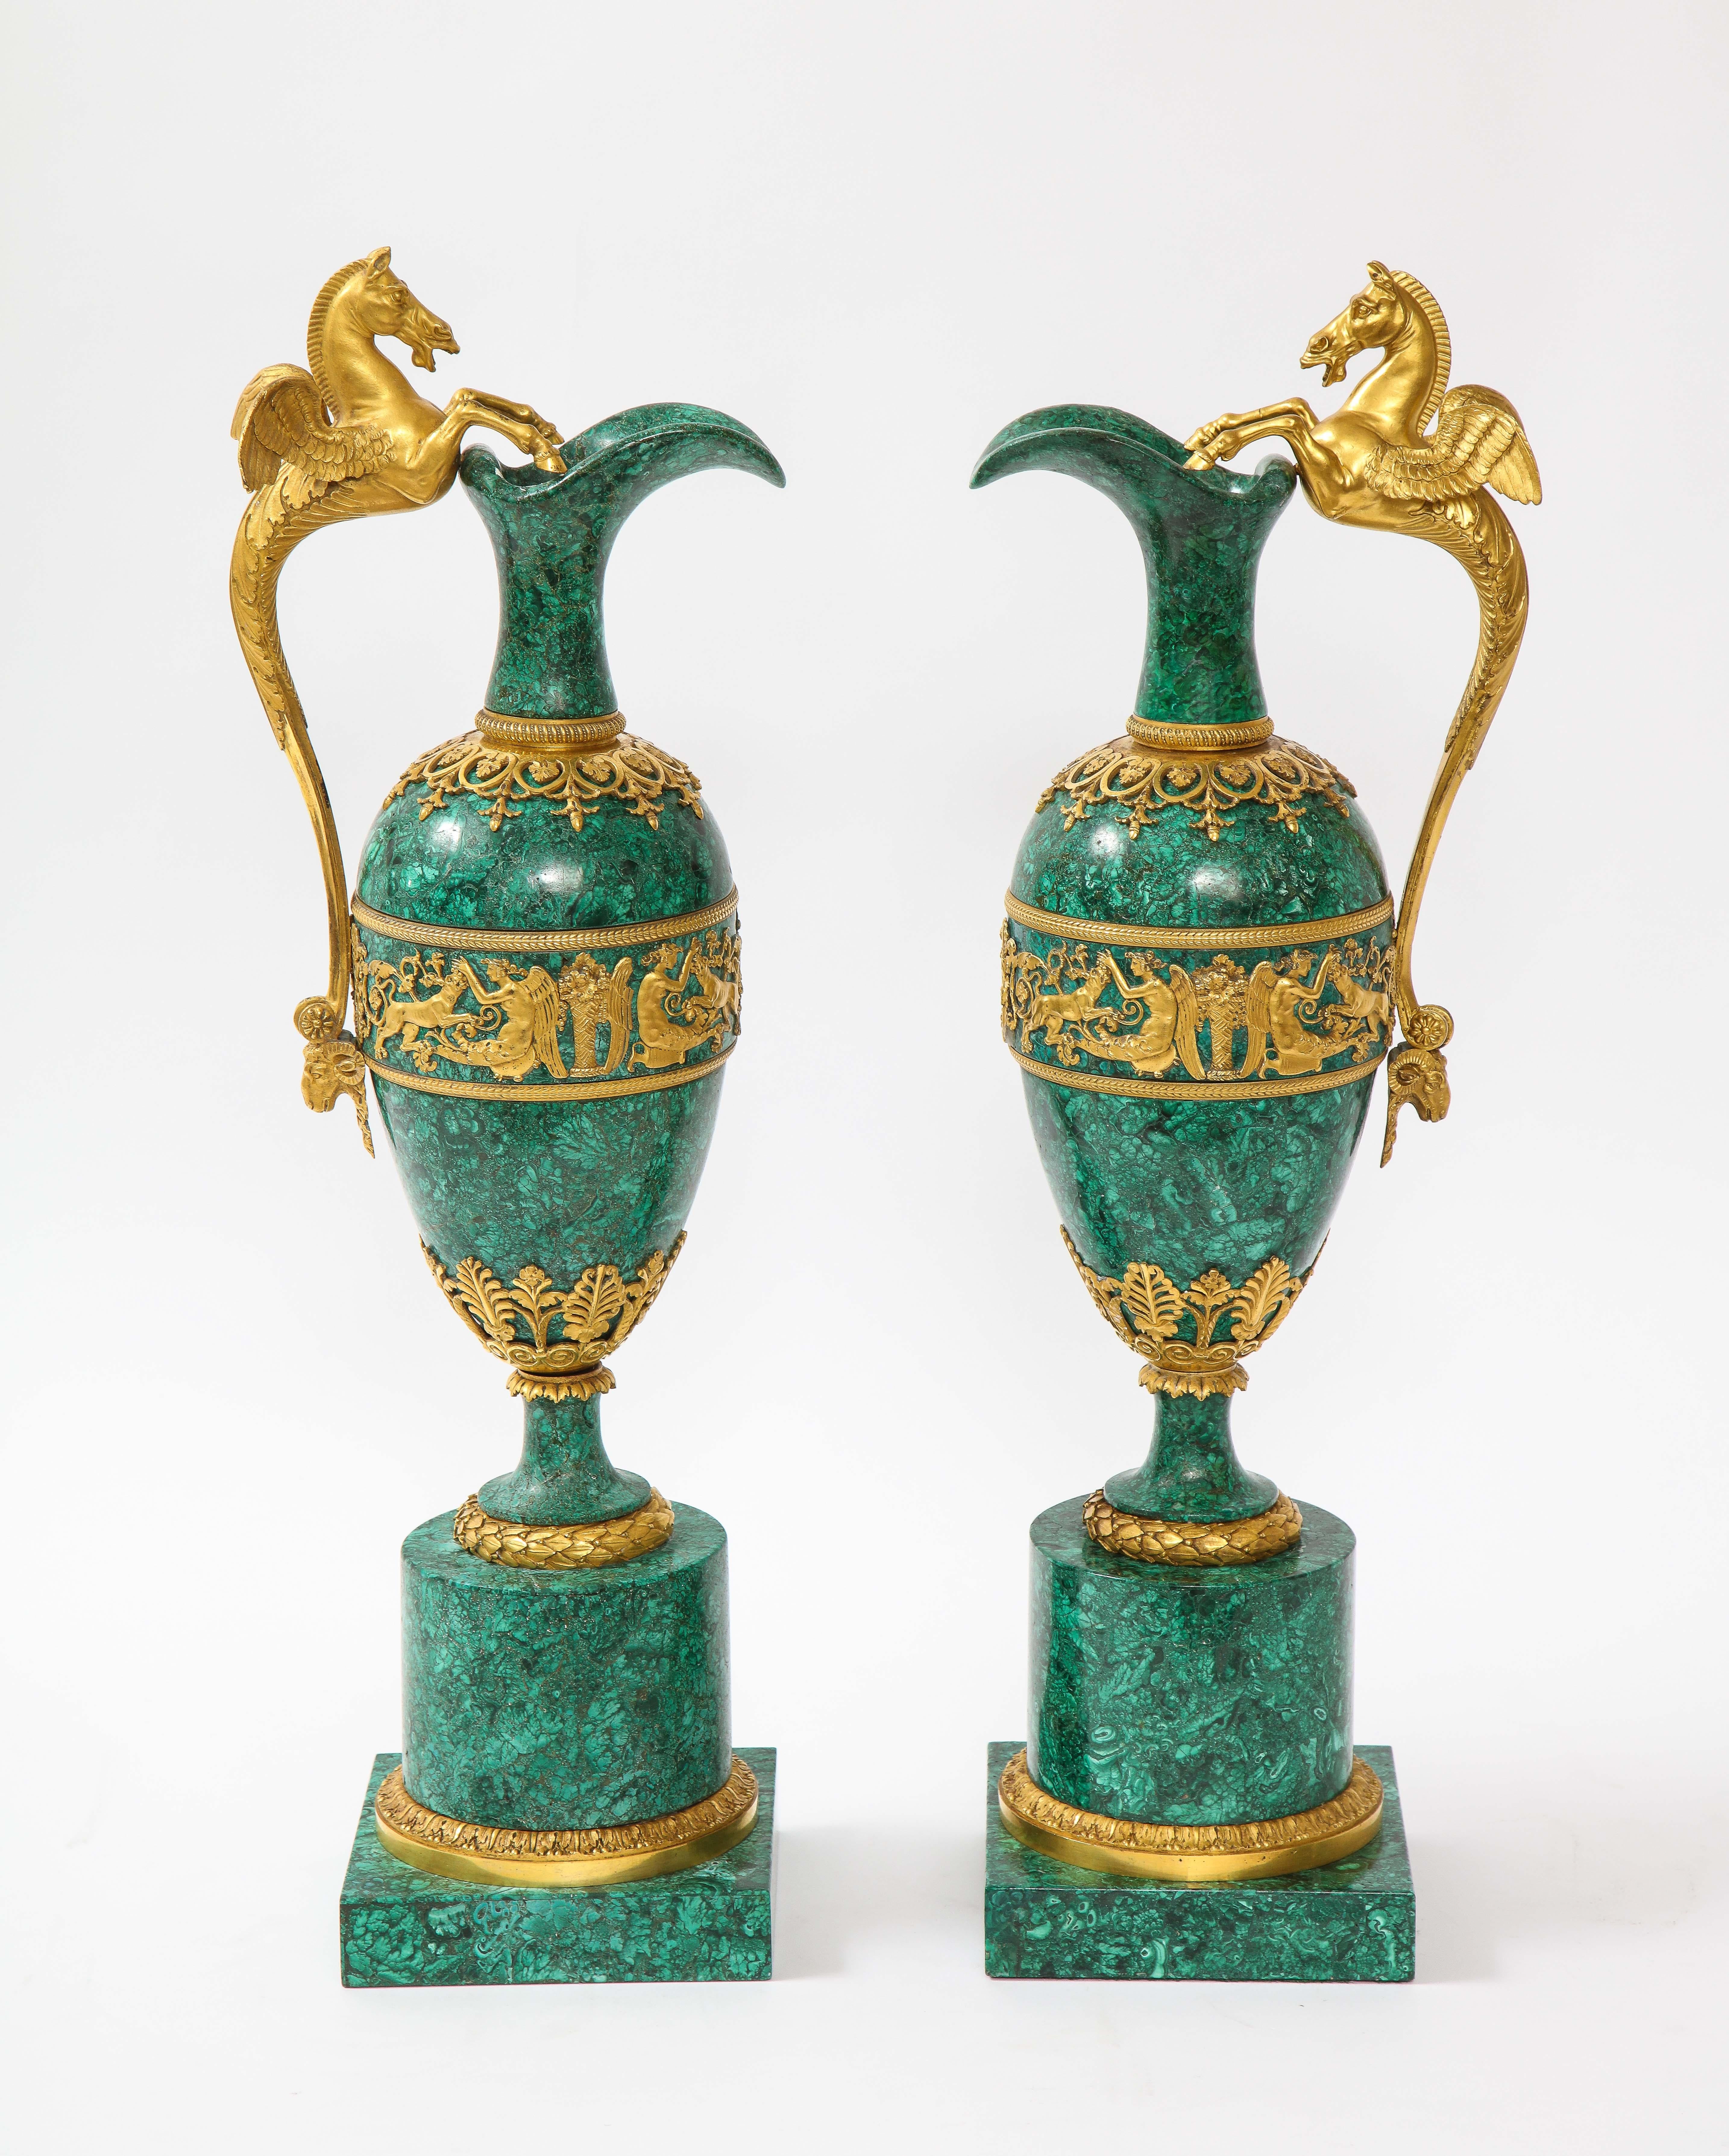 Early 19th Century Empire Ormolu-Mounted Malachite Ewers Attributed to Claude Galle, Russian, Pair